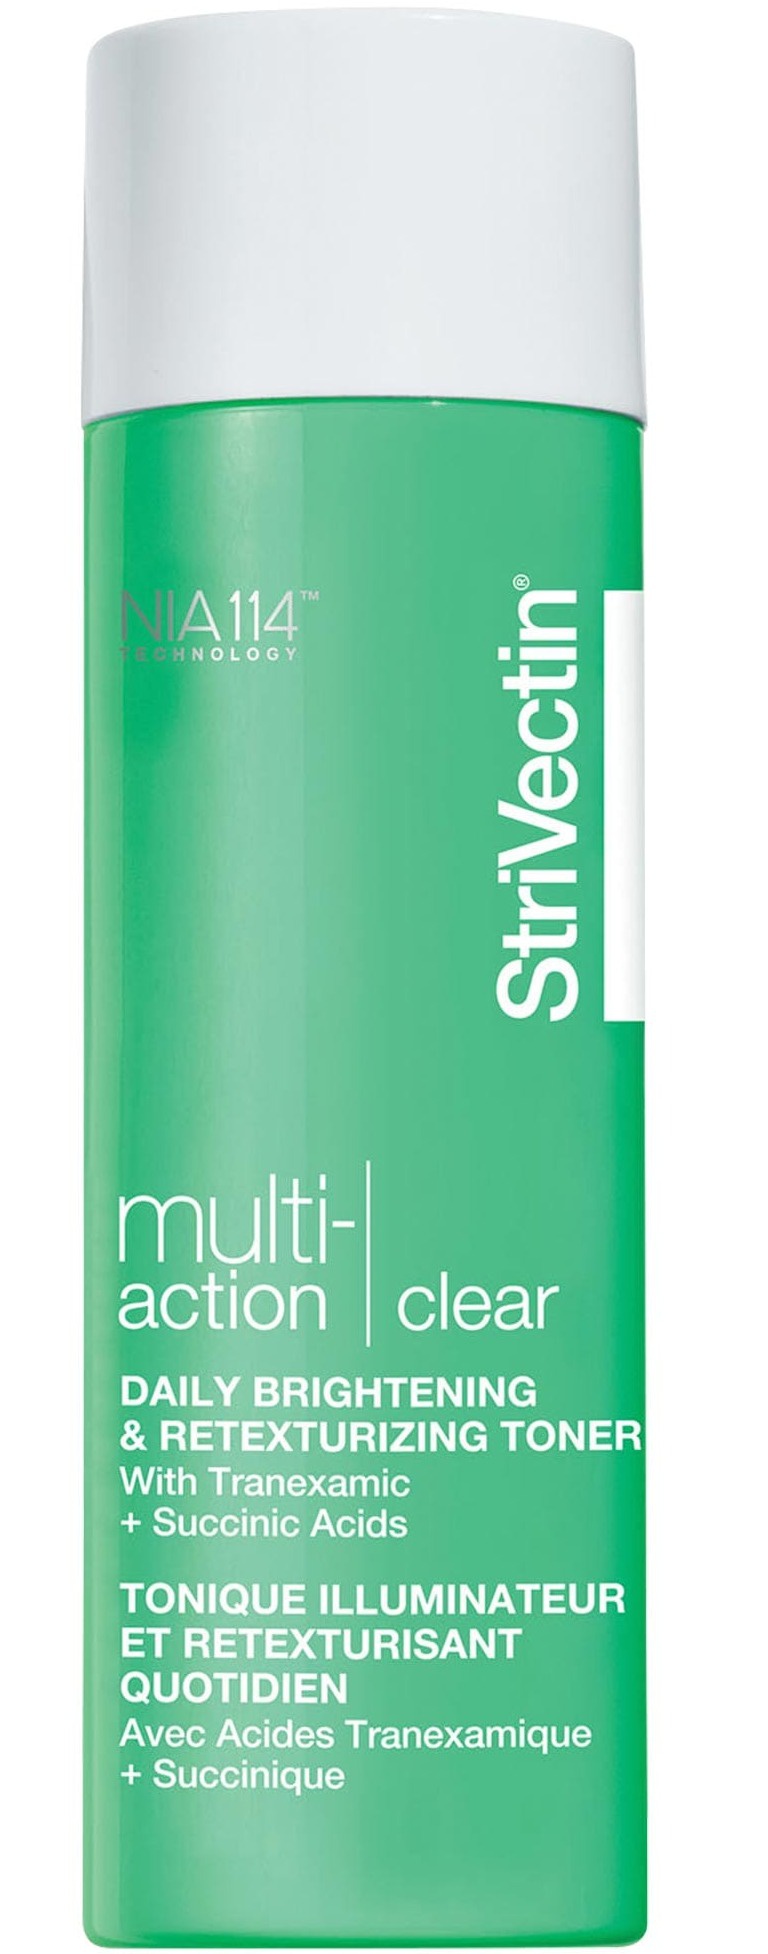 StriVectin Multi Action Clear Gentle Daily Brightening Toner